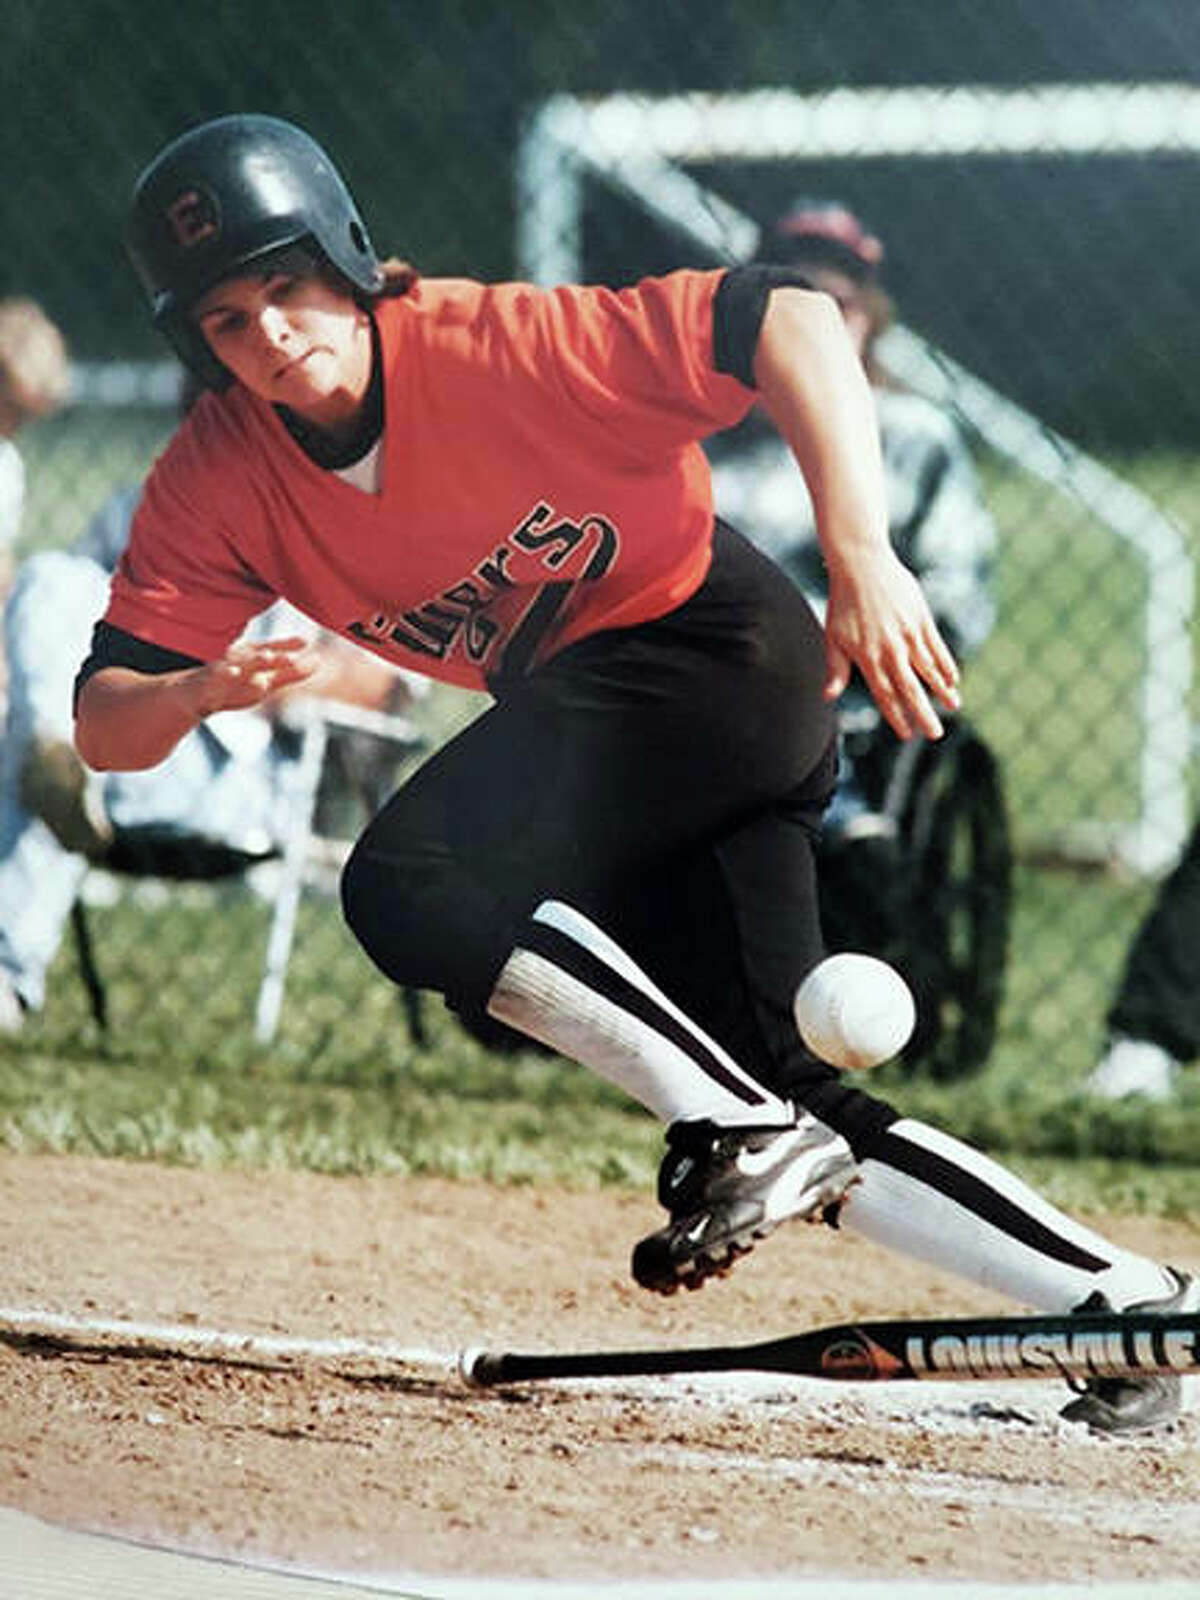 Jacque Woosley, a 1998 Edwardsville graduate, lays down a bunt during her softball playing days at EHS.